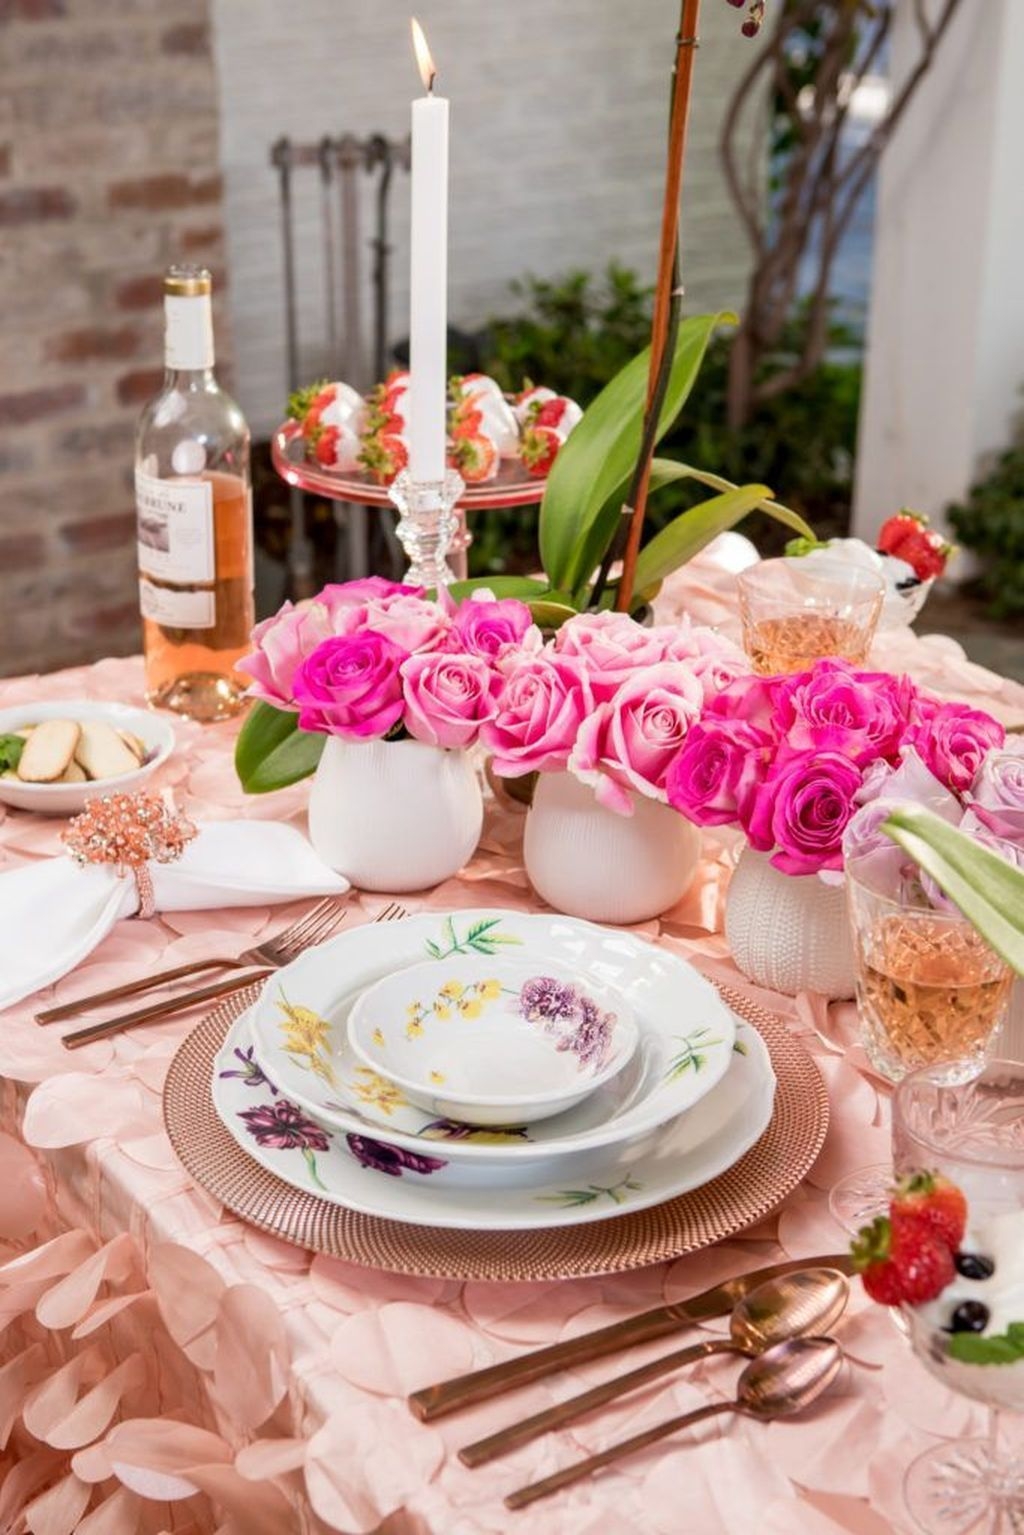 Perfect Valentine’s Day Romantic Dining Table Decor Ideas For Two People 16